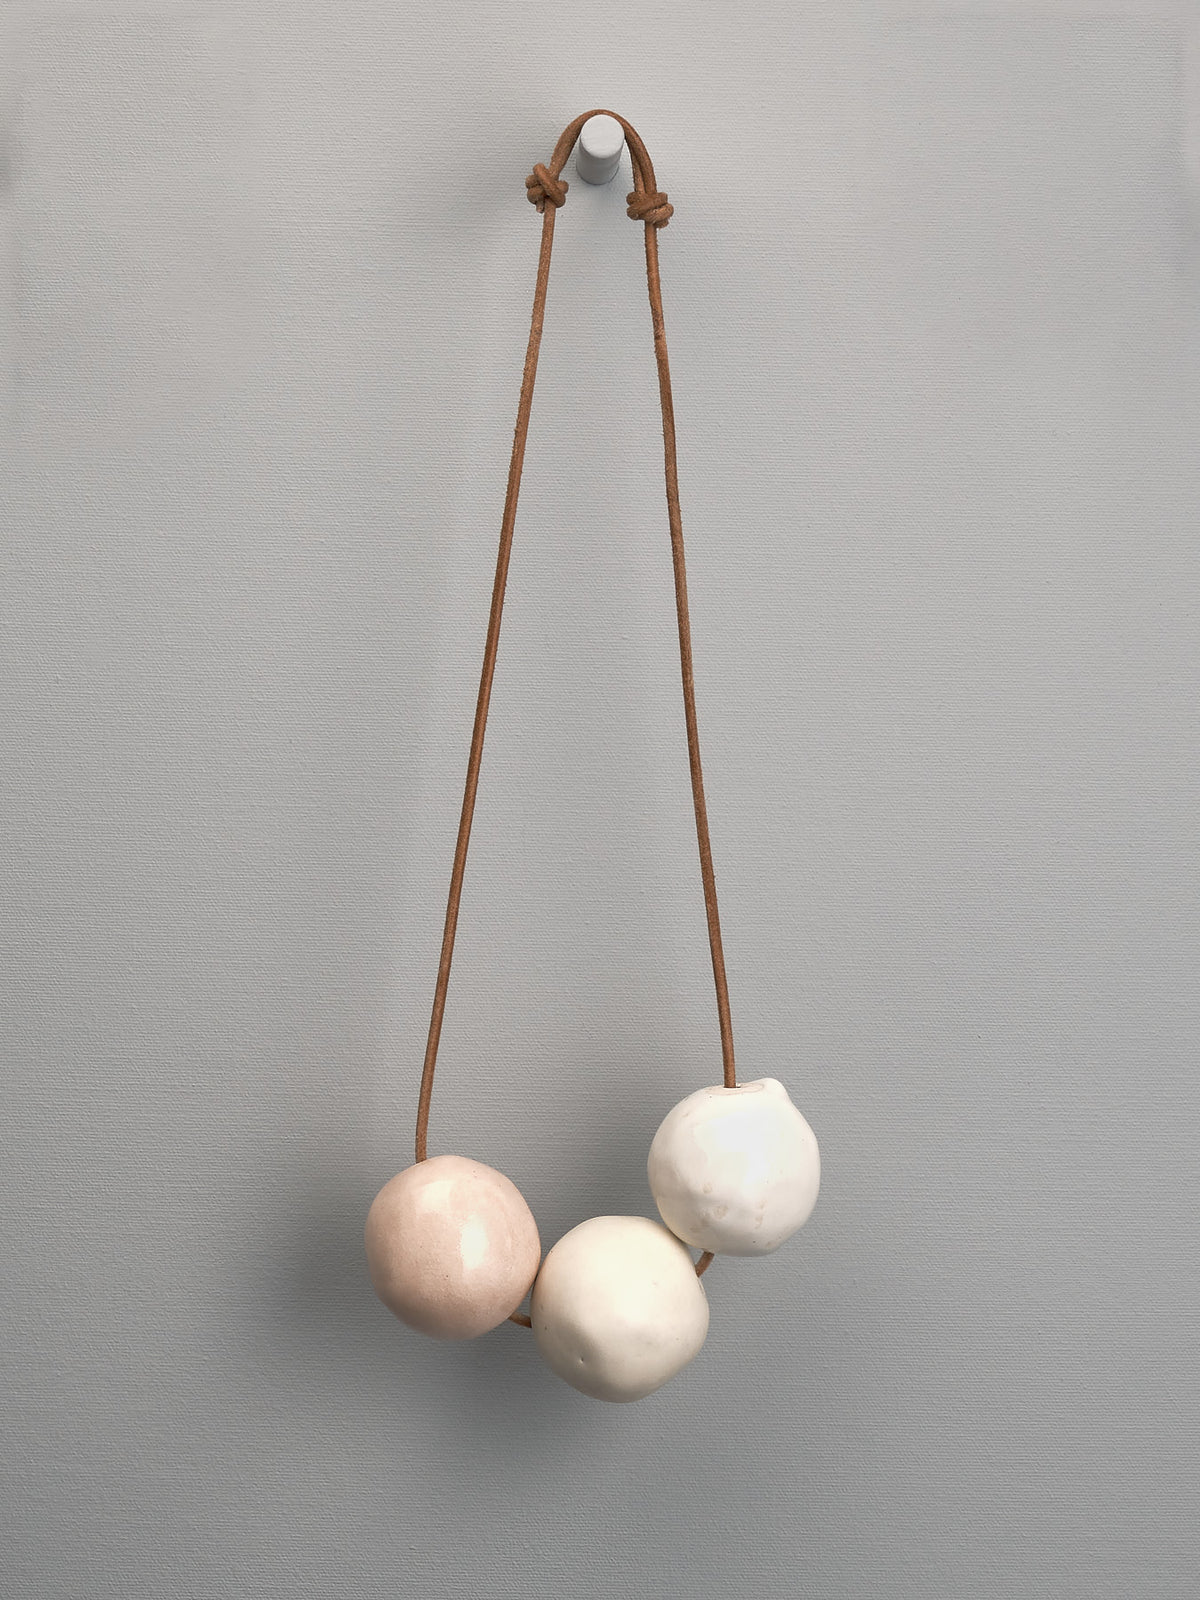 A Tamara Rookes necklace with three Ceramic Beads – Ø 50𝗆𝗆 hanging from a leather cord.